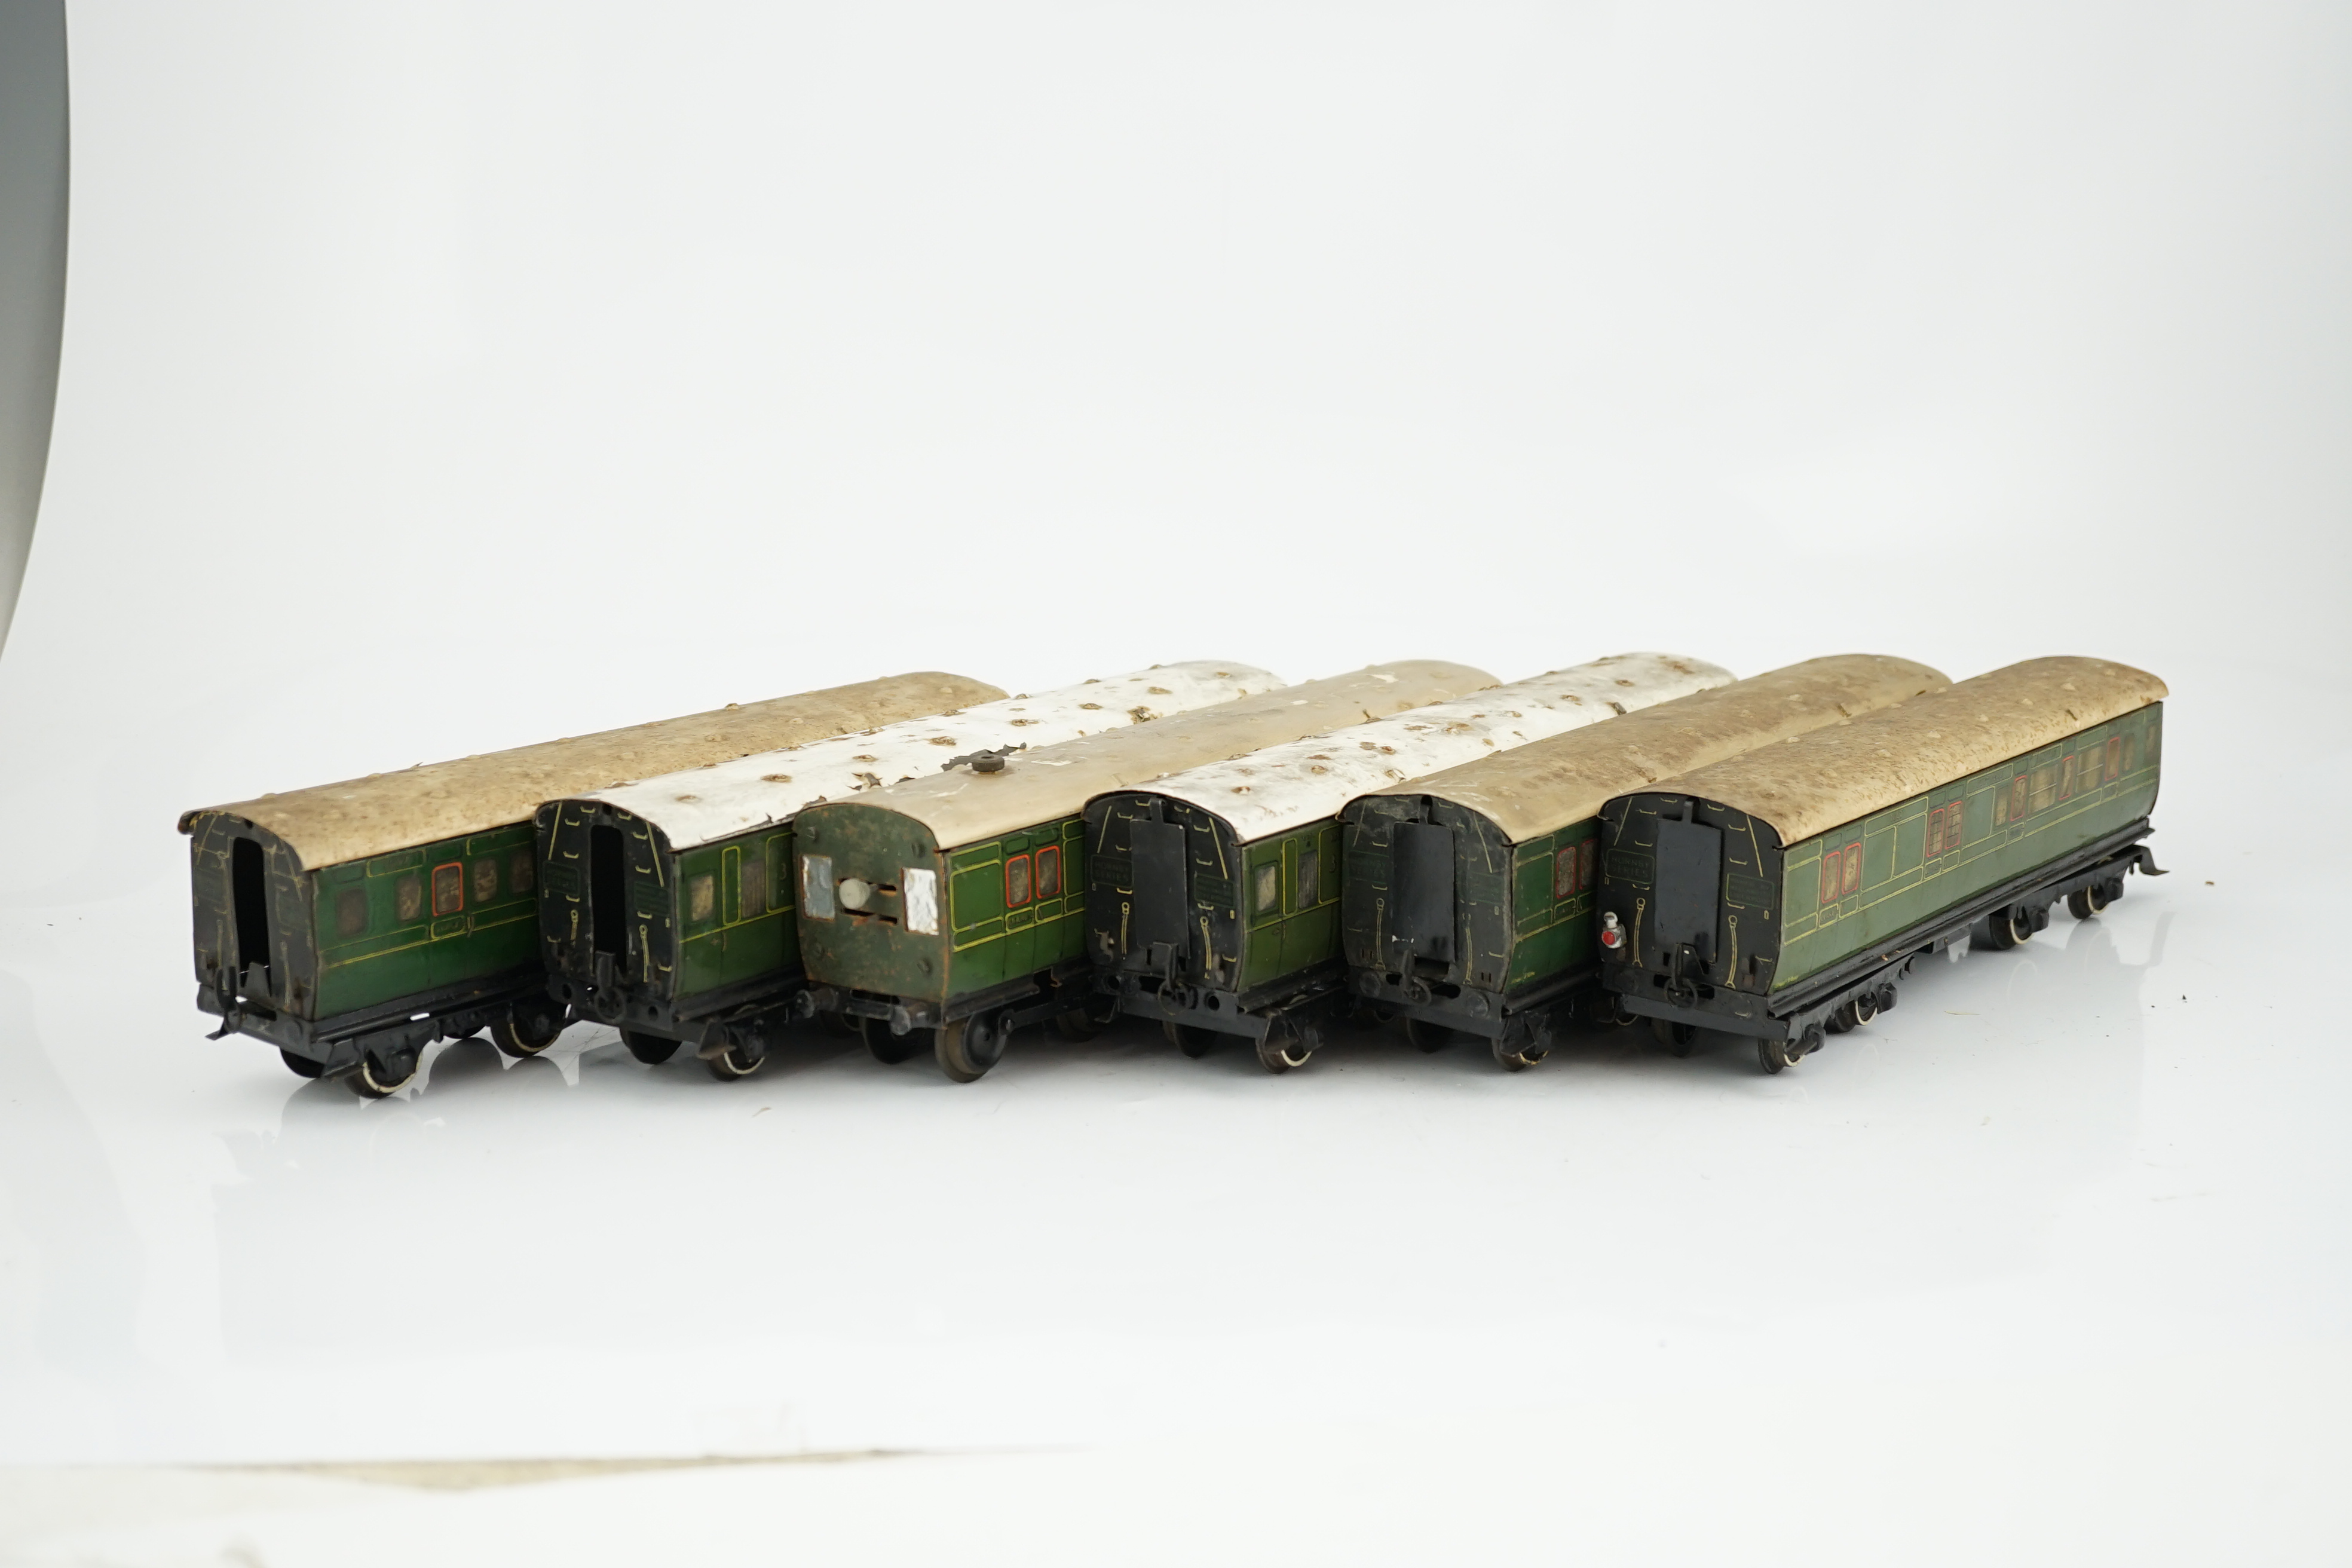 Six Hornby 0 gauge tinplate No.2 coaches in Southern Railway livery, one coach adapted to a driving unit with clockwork motor and replacement bogie